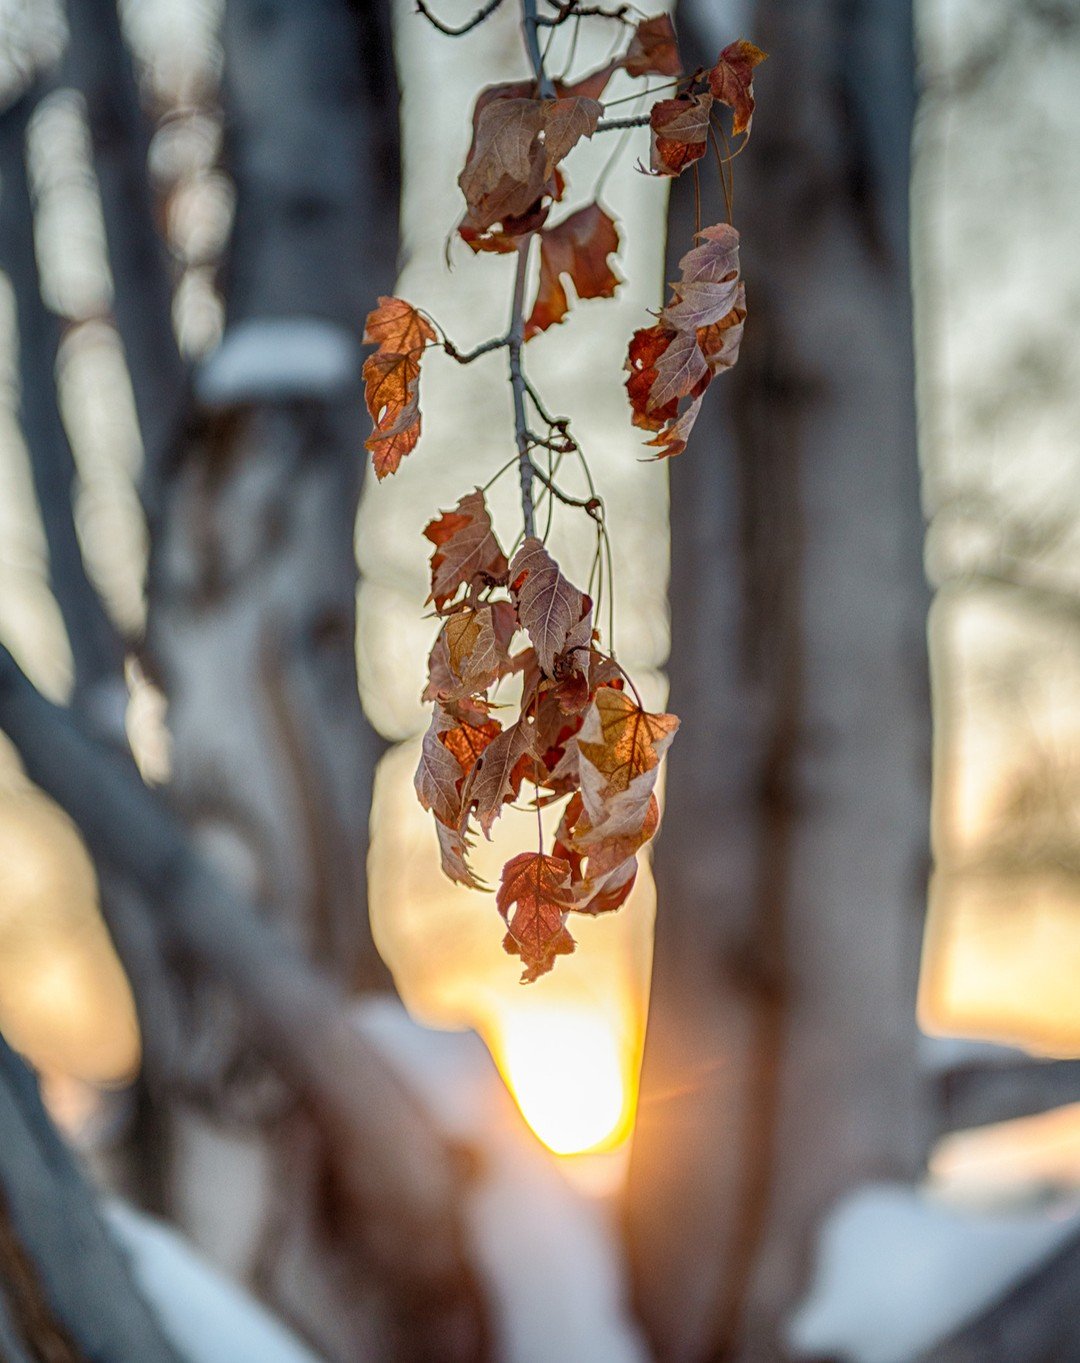 &ldquo;The light of winter is the poetry of patience.&rdquo;
~ Unknown

It's still wintry here in Boulder. It's currently 31 degrees and foggy with more snow and rain later tonight.

Winter Sun Series - Solstice Leaves, Solstice Light &amp; Winter Su